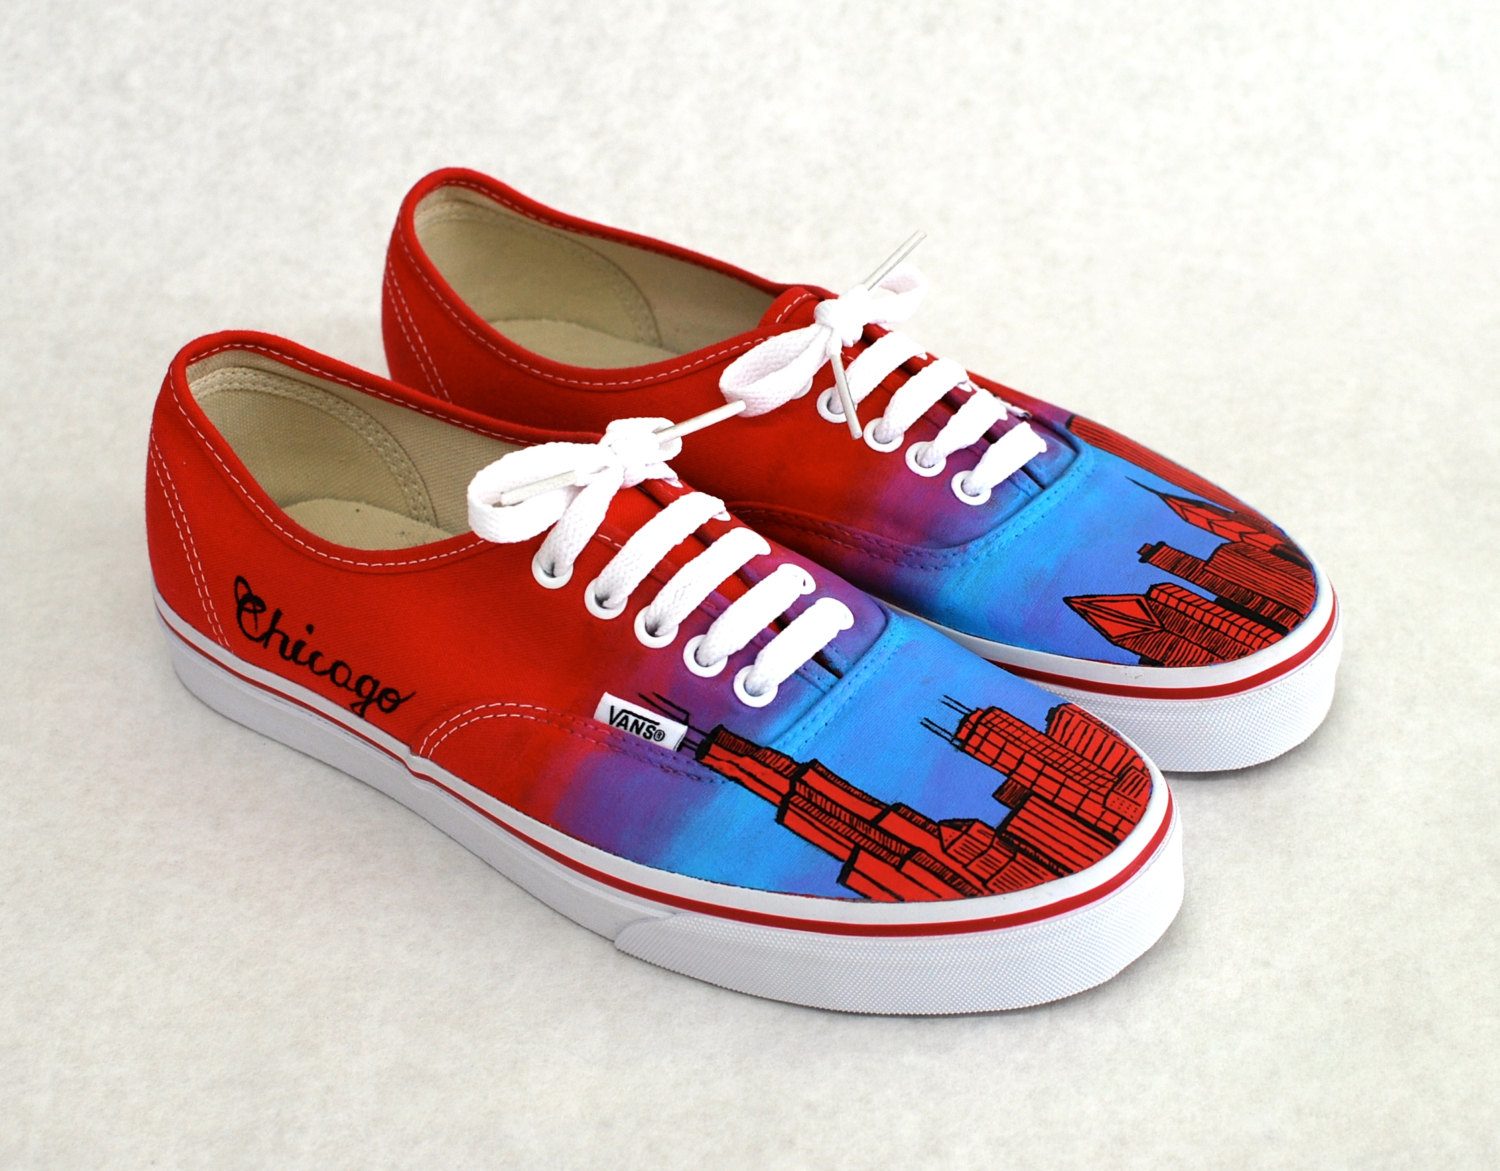 10 Super Cool Pairs Of Customized Vans Shoes for Sale On ...